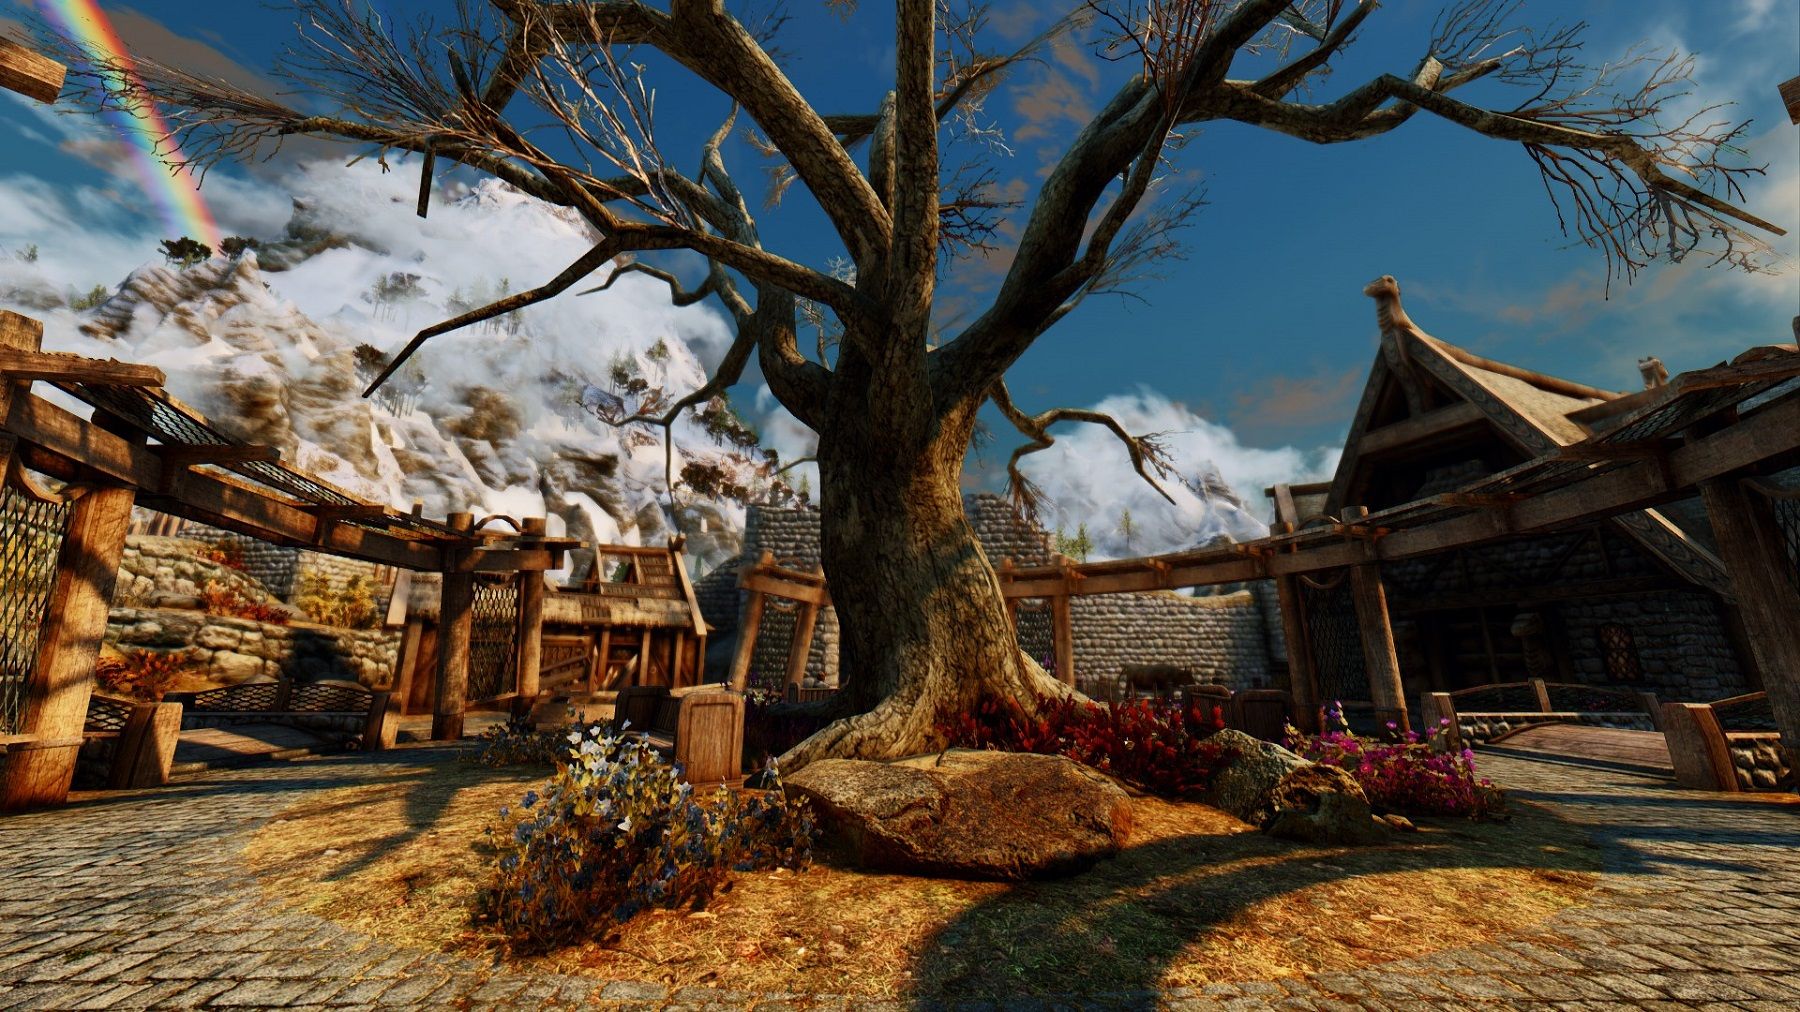 Image from Skyrim showing a tree in the middle of a town square.